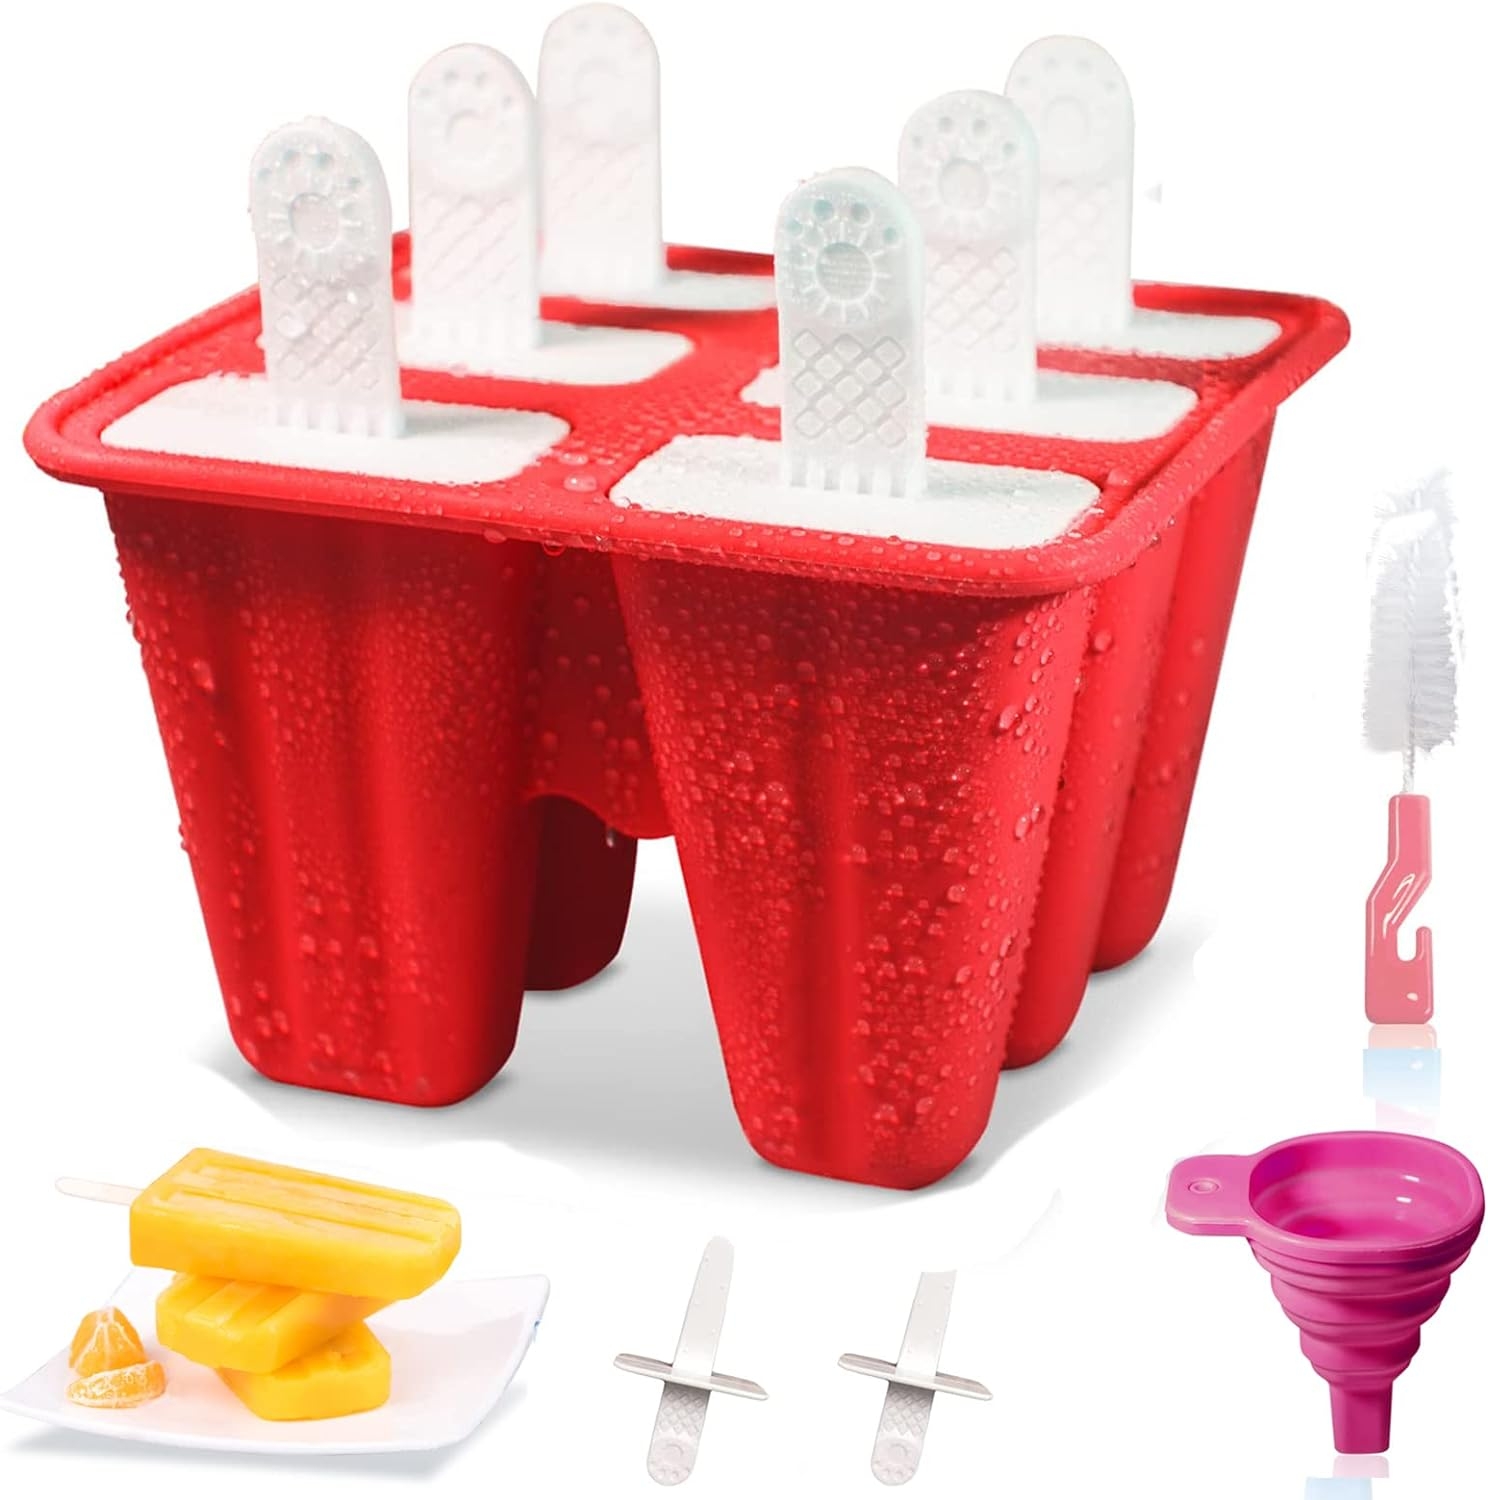 Popsicle Ice Mold Maker Set - 6 Pcs BPA Free Pink Ice Pop Mold Holders with Tray